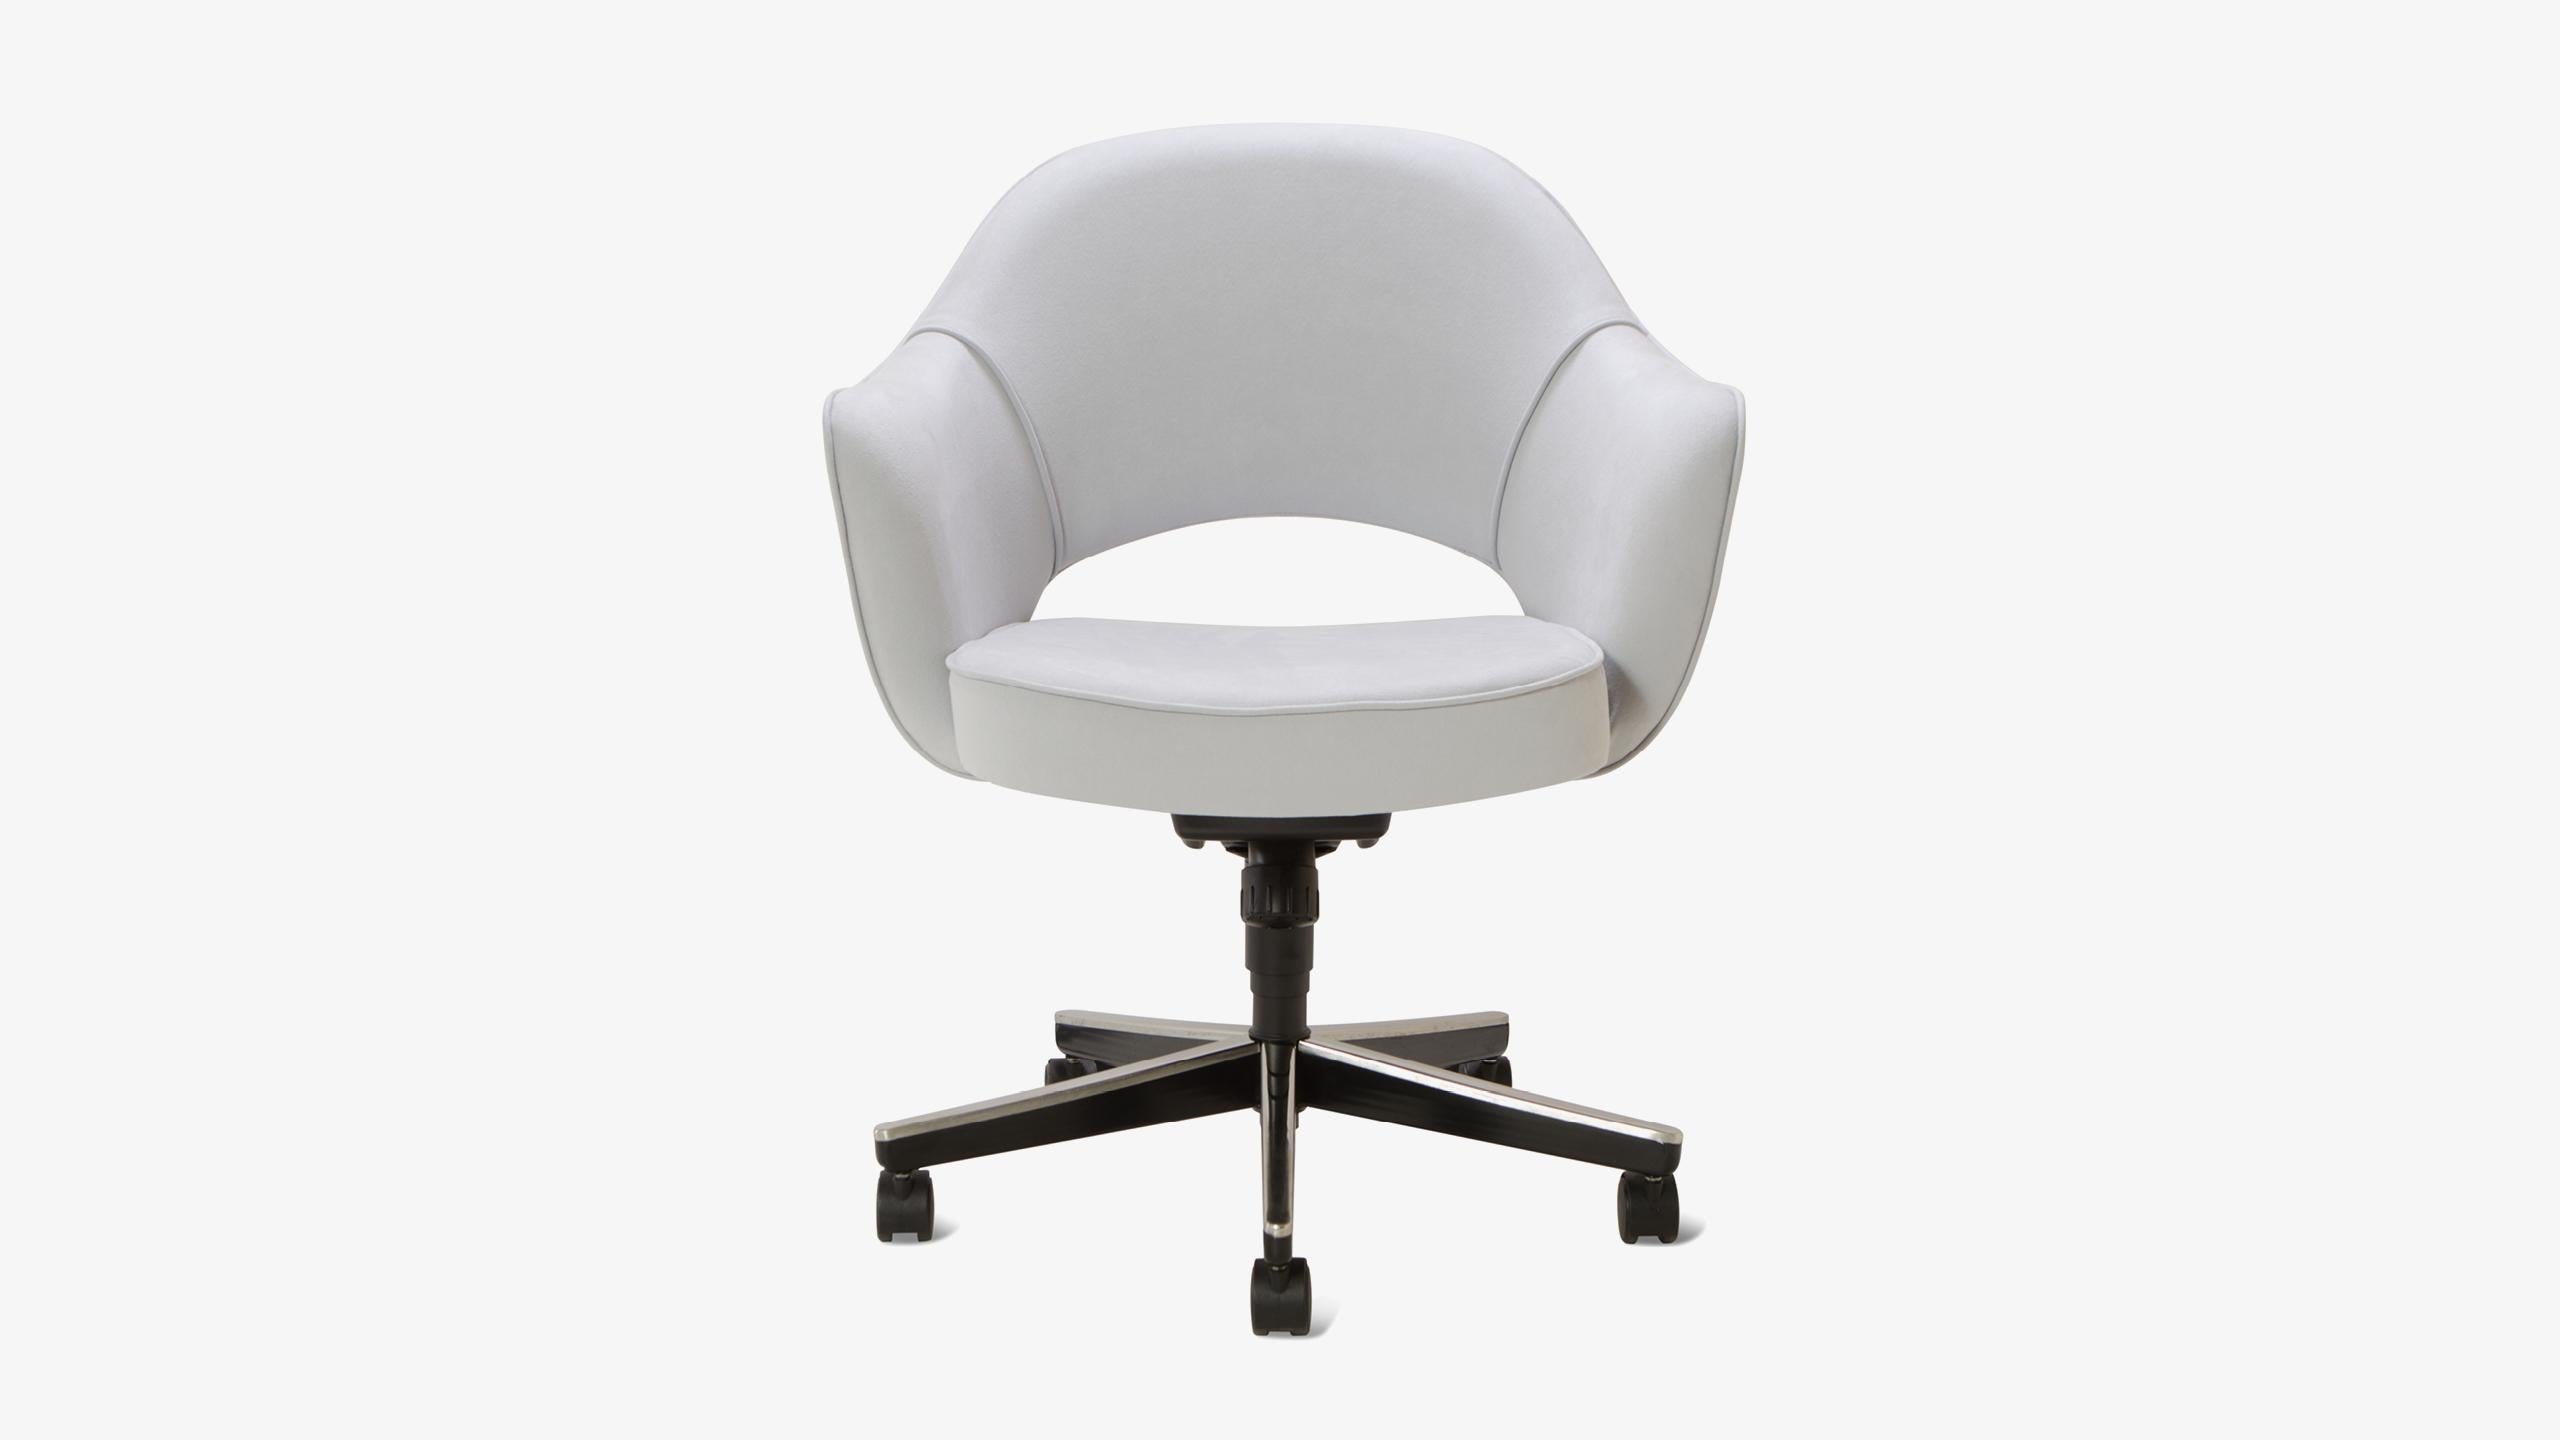 We have been restoring Saarinen executive chairs for years in every fabric one can imagine, right in our very own workroom. We’ve restored these chairs using a soft yet durable Luxe Suede in Fog. Please inquire about the possibilities of our